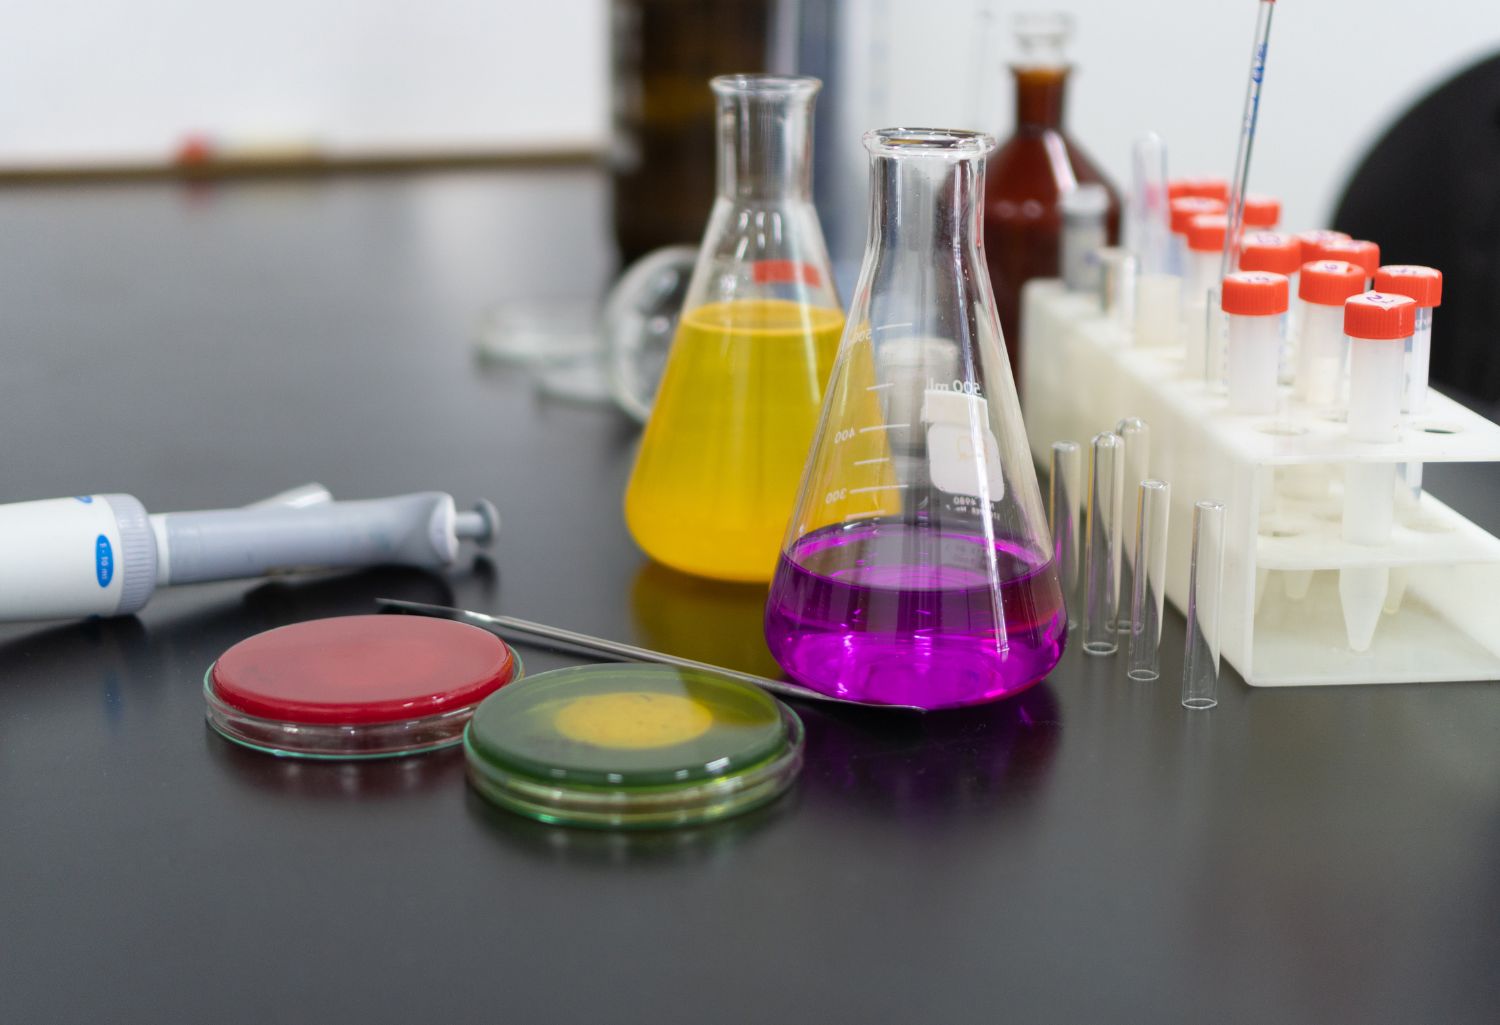 Non-Payment in Chemical Materials: View of laboratory materials for chemical testing